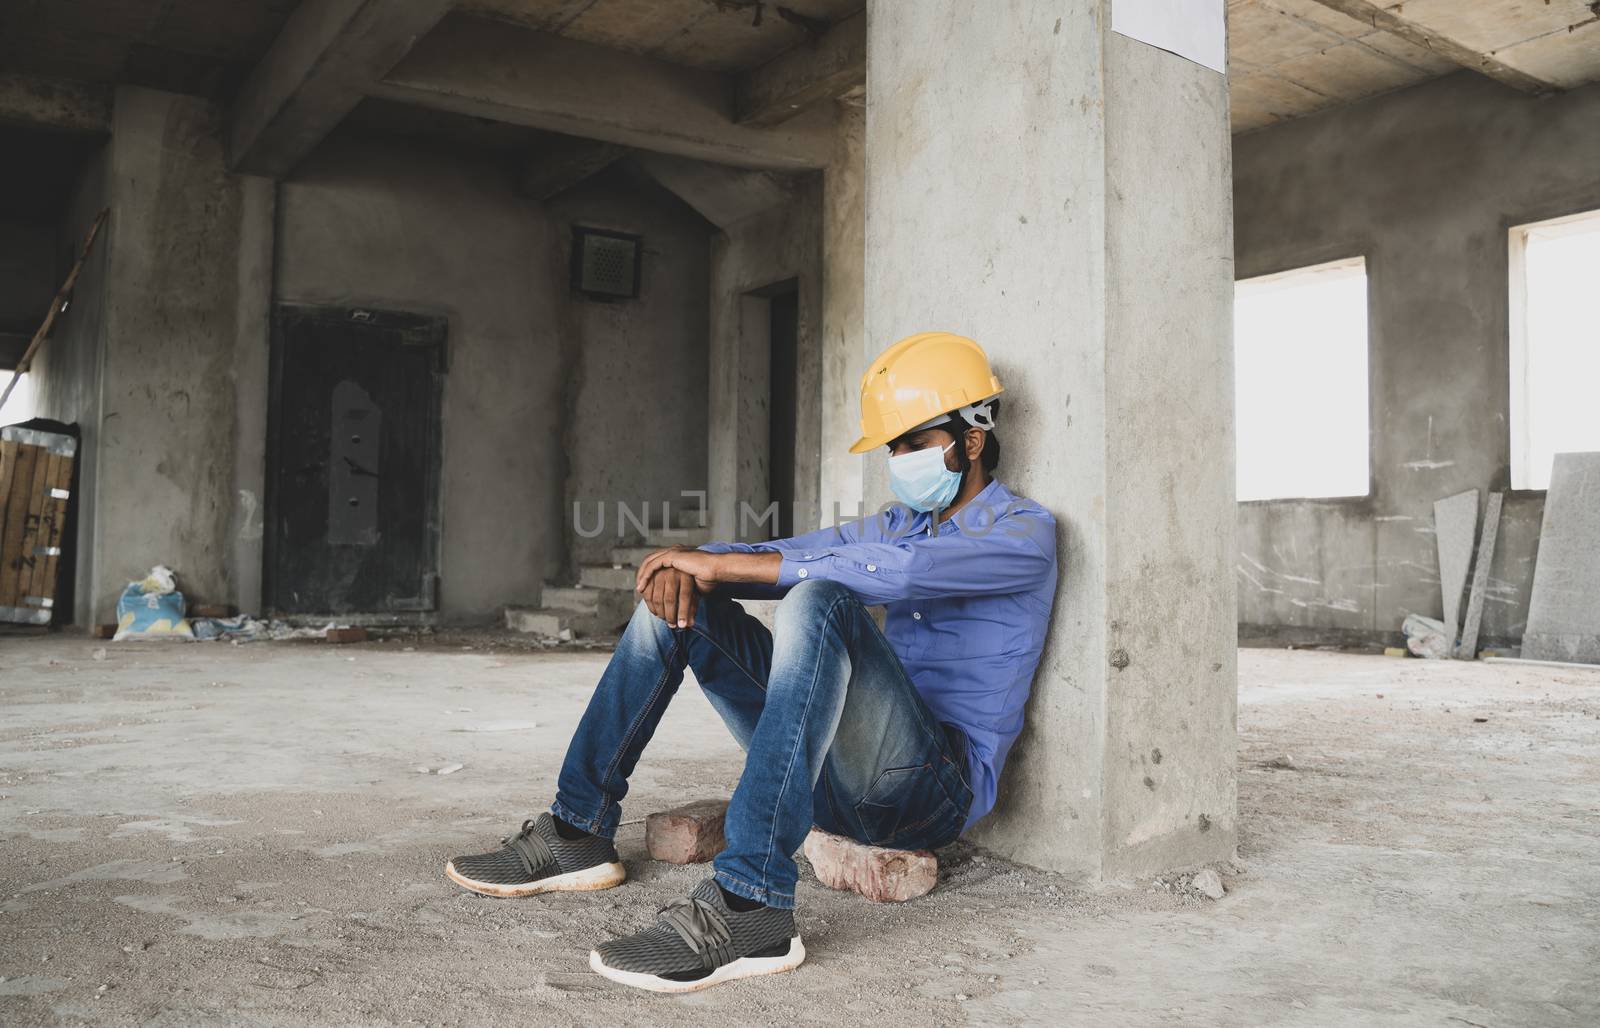 construction worker sitting sad and lonely at job site wearing a medical mask with hardhat to prevent Covid-19 spreading, Concept of unemployment, economic crisis Job loss during coronavirus crisis